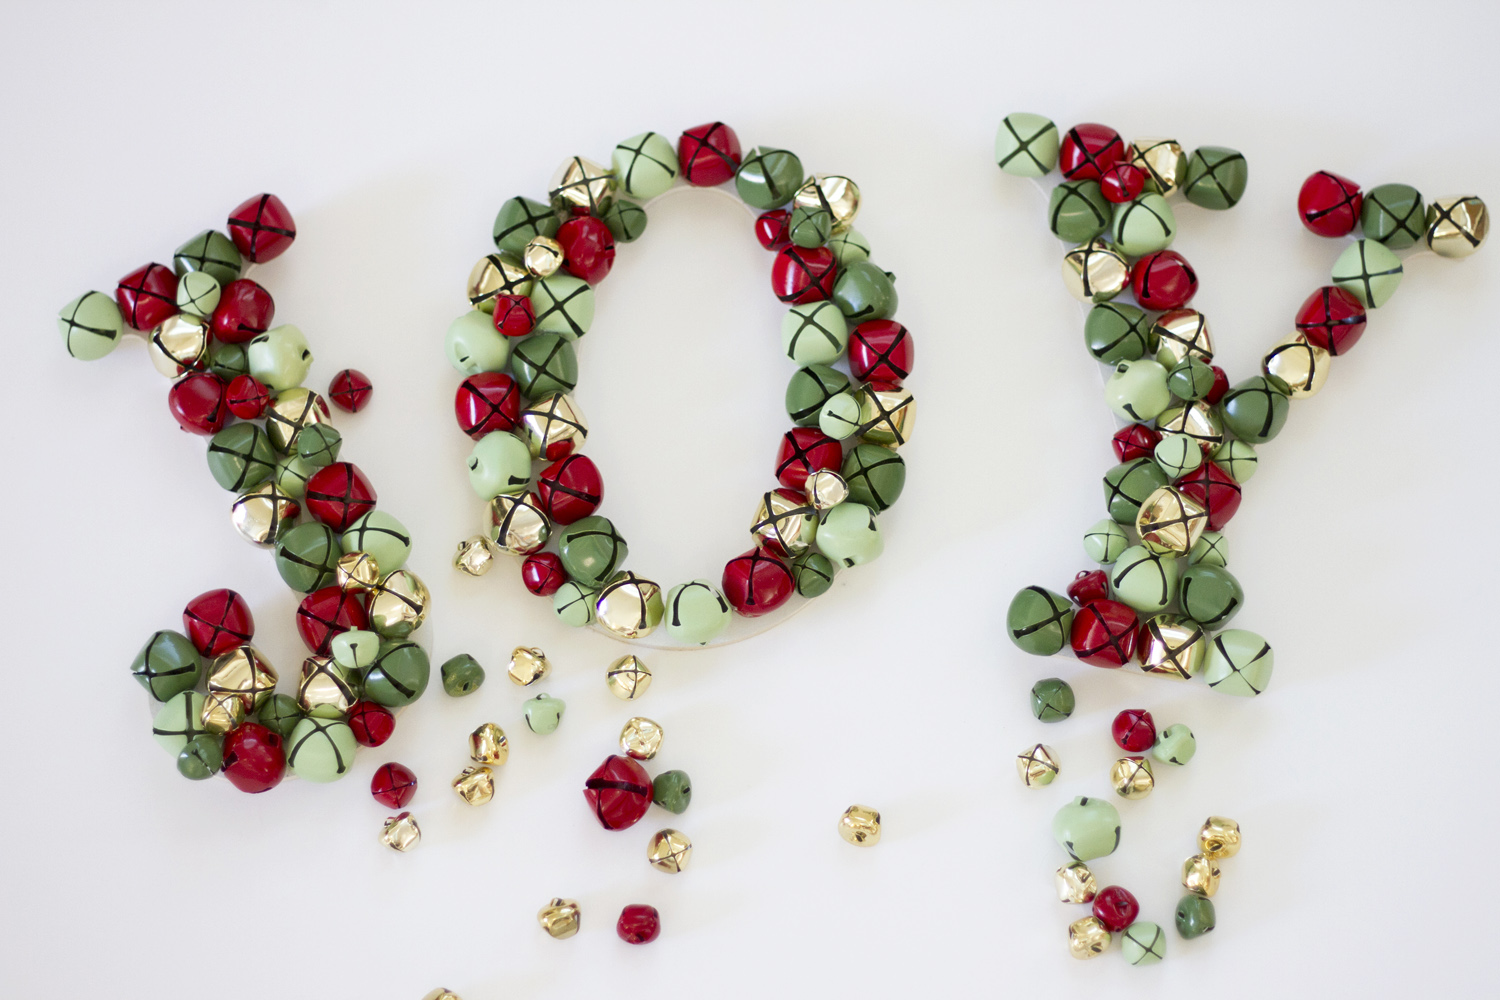 Festive Jingle Bell JOY Letters Decorations featured by Utah lifestyle blog, By Jen Rose